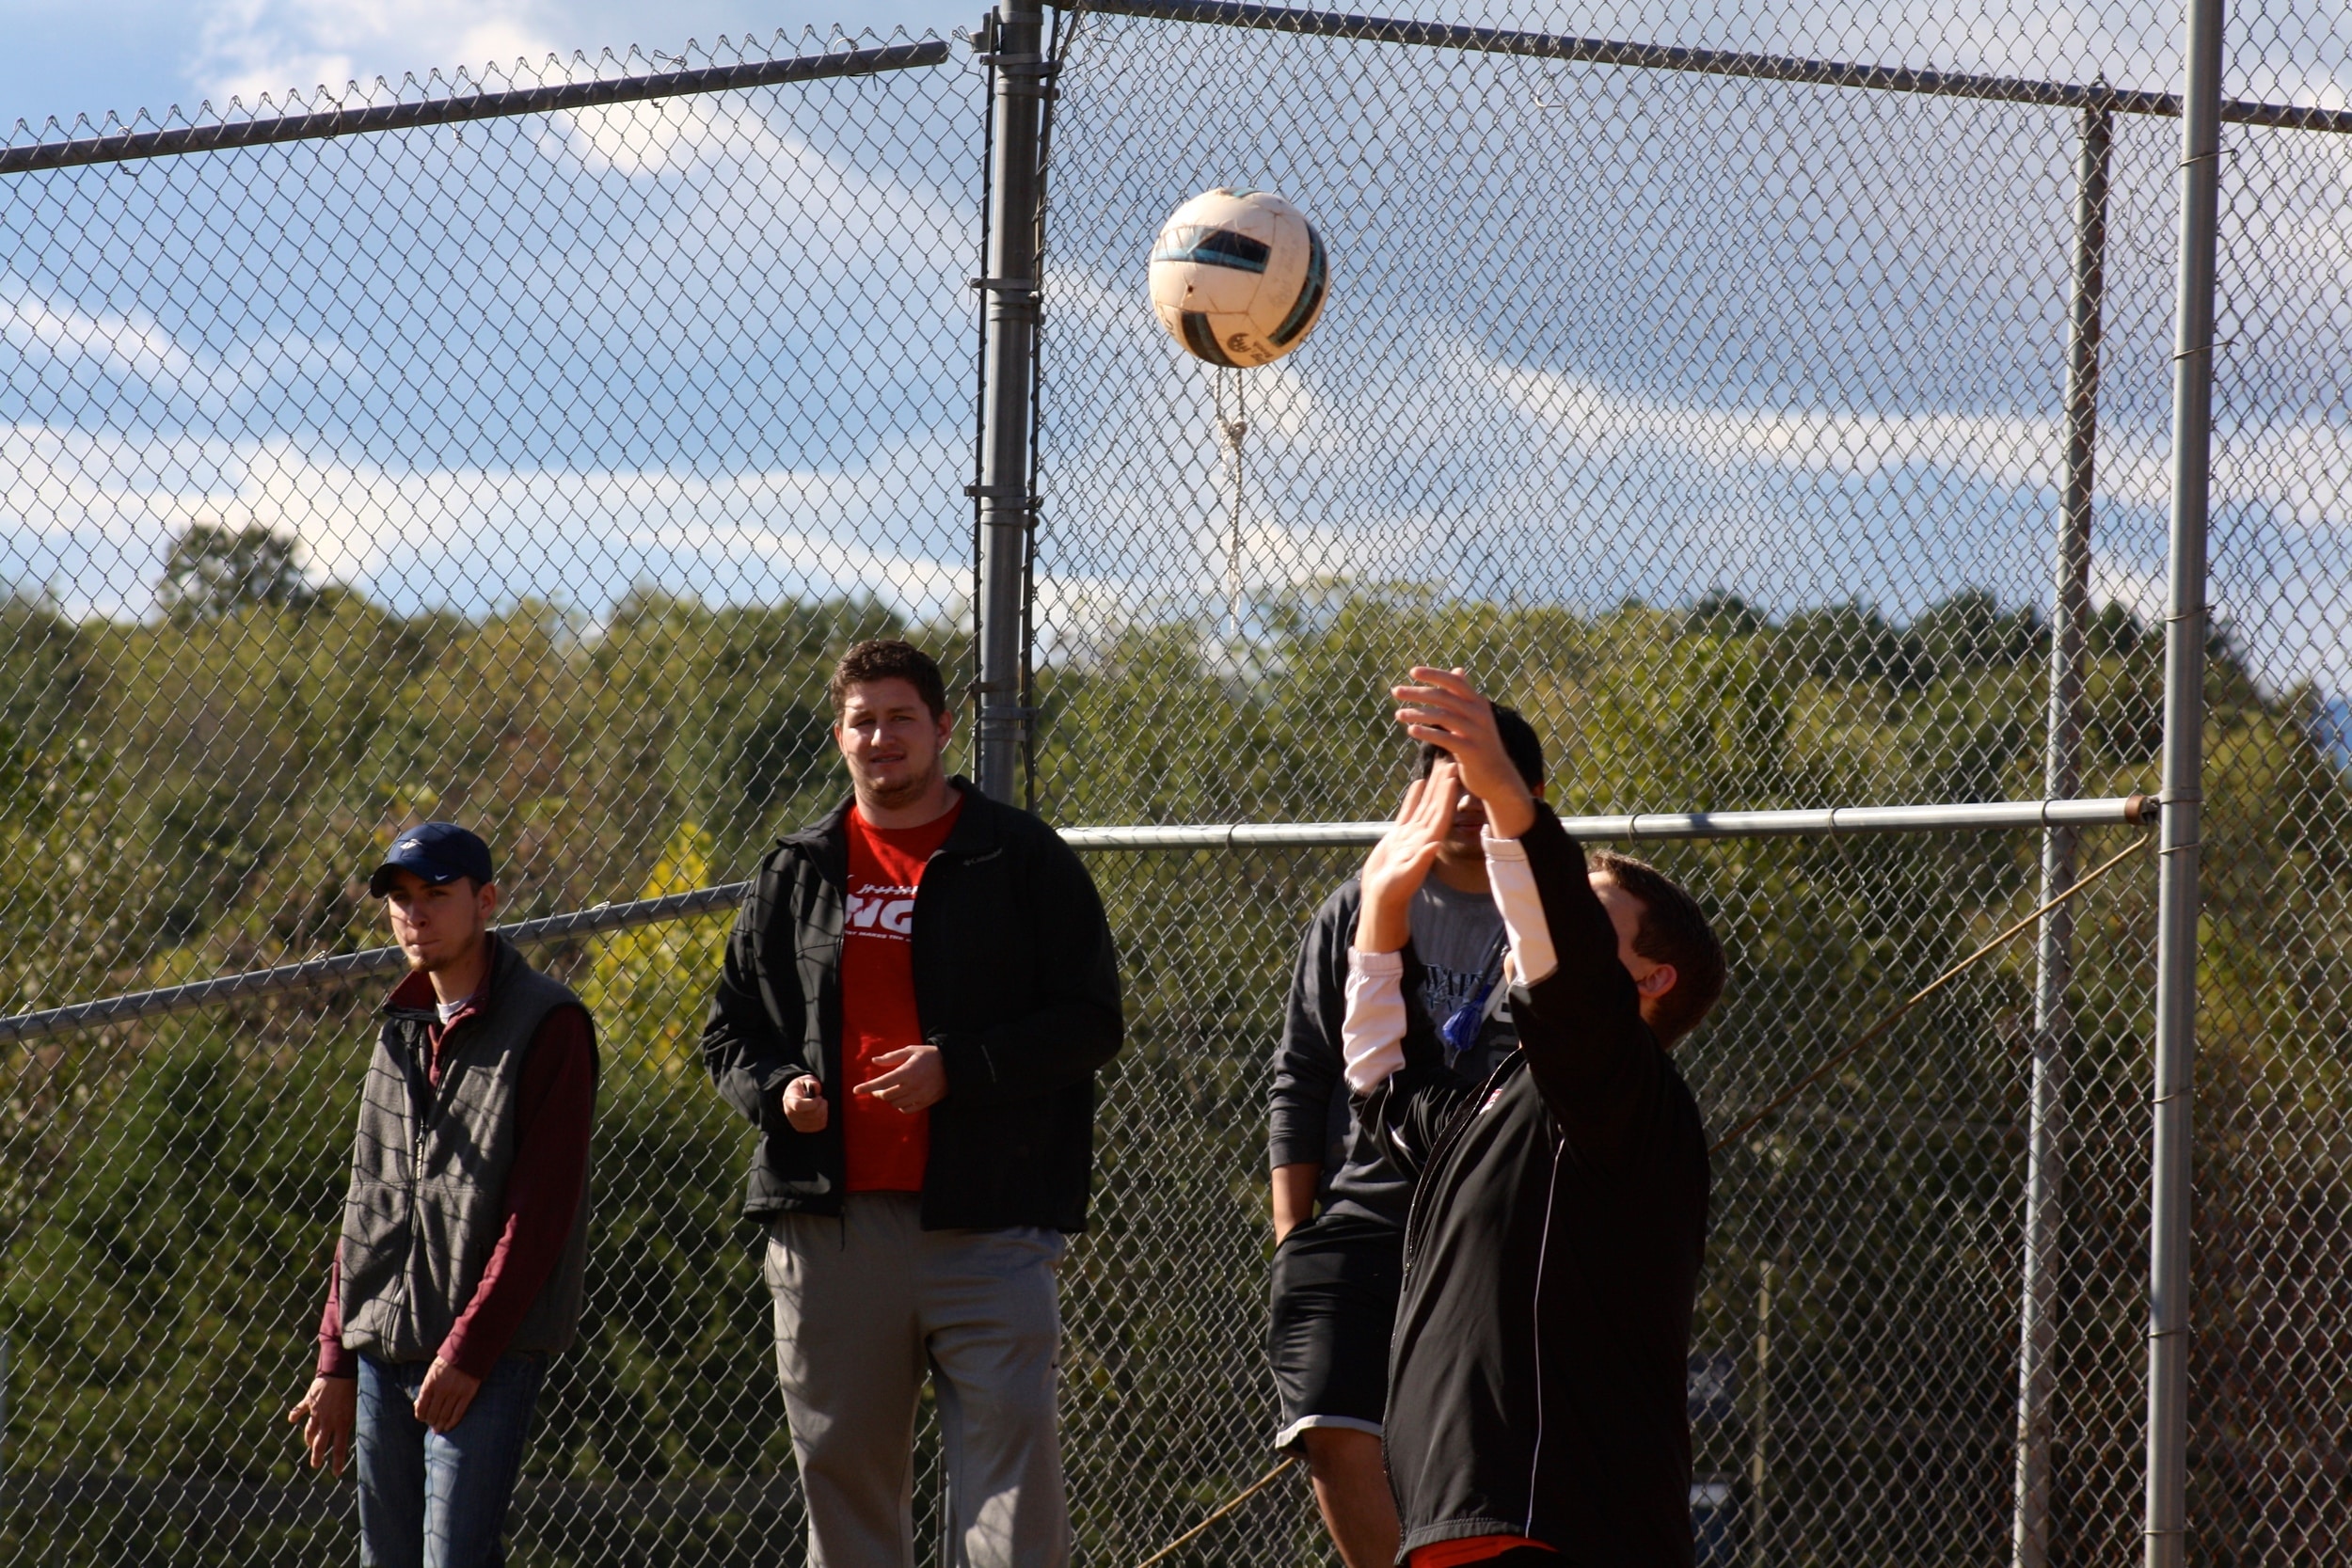  A student serves the ball by tossing it into the air. 